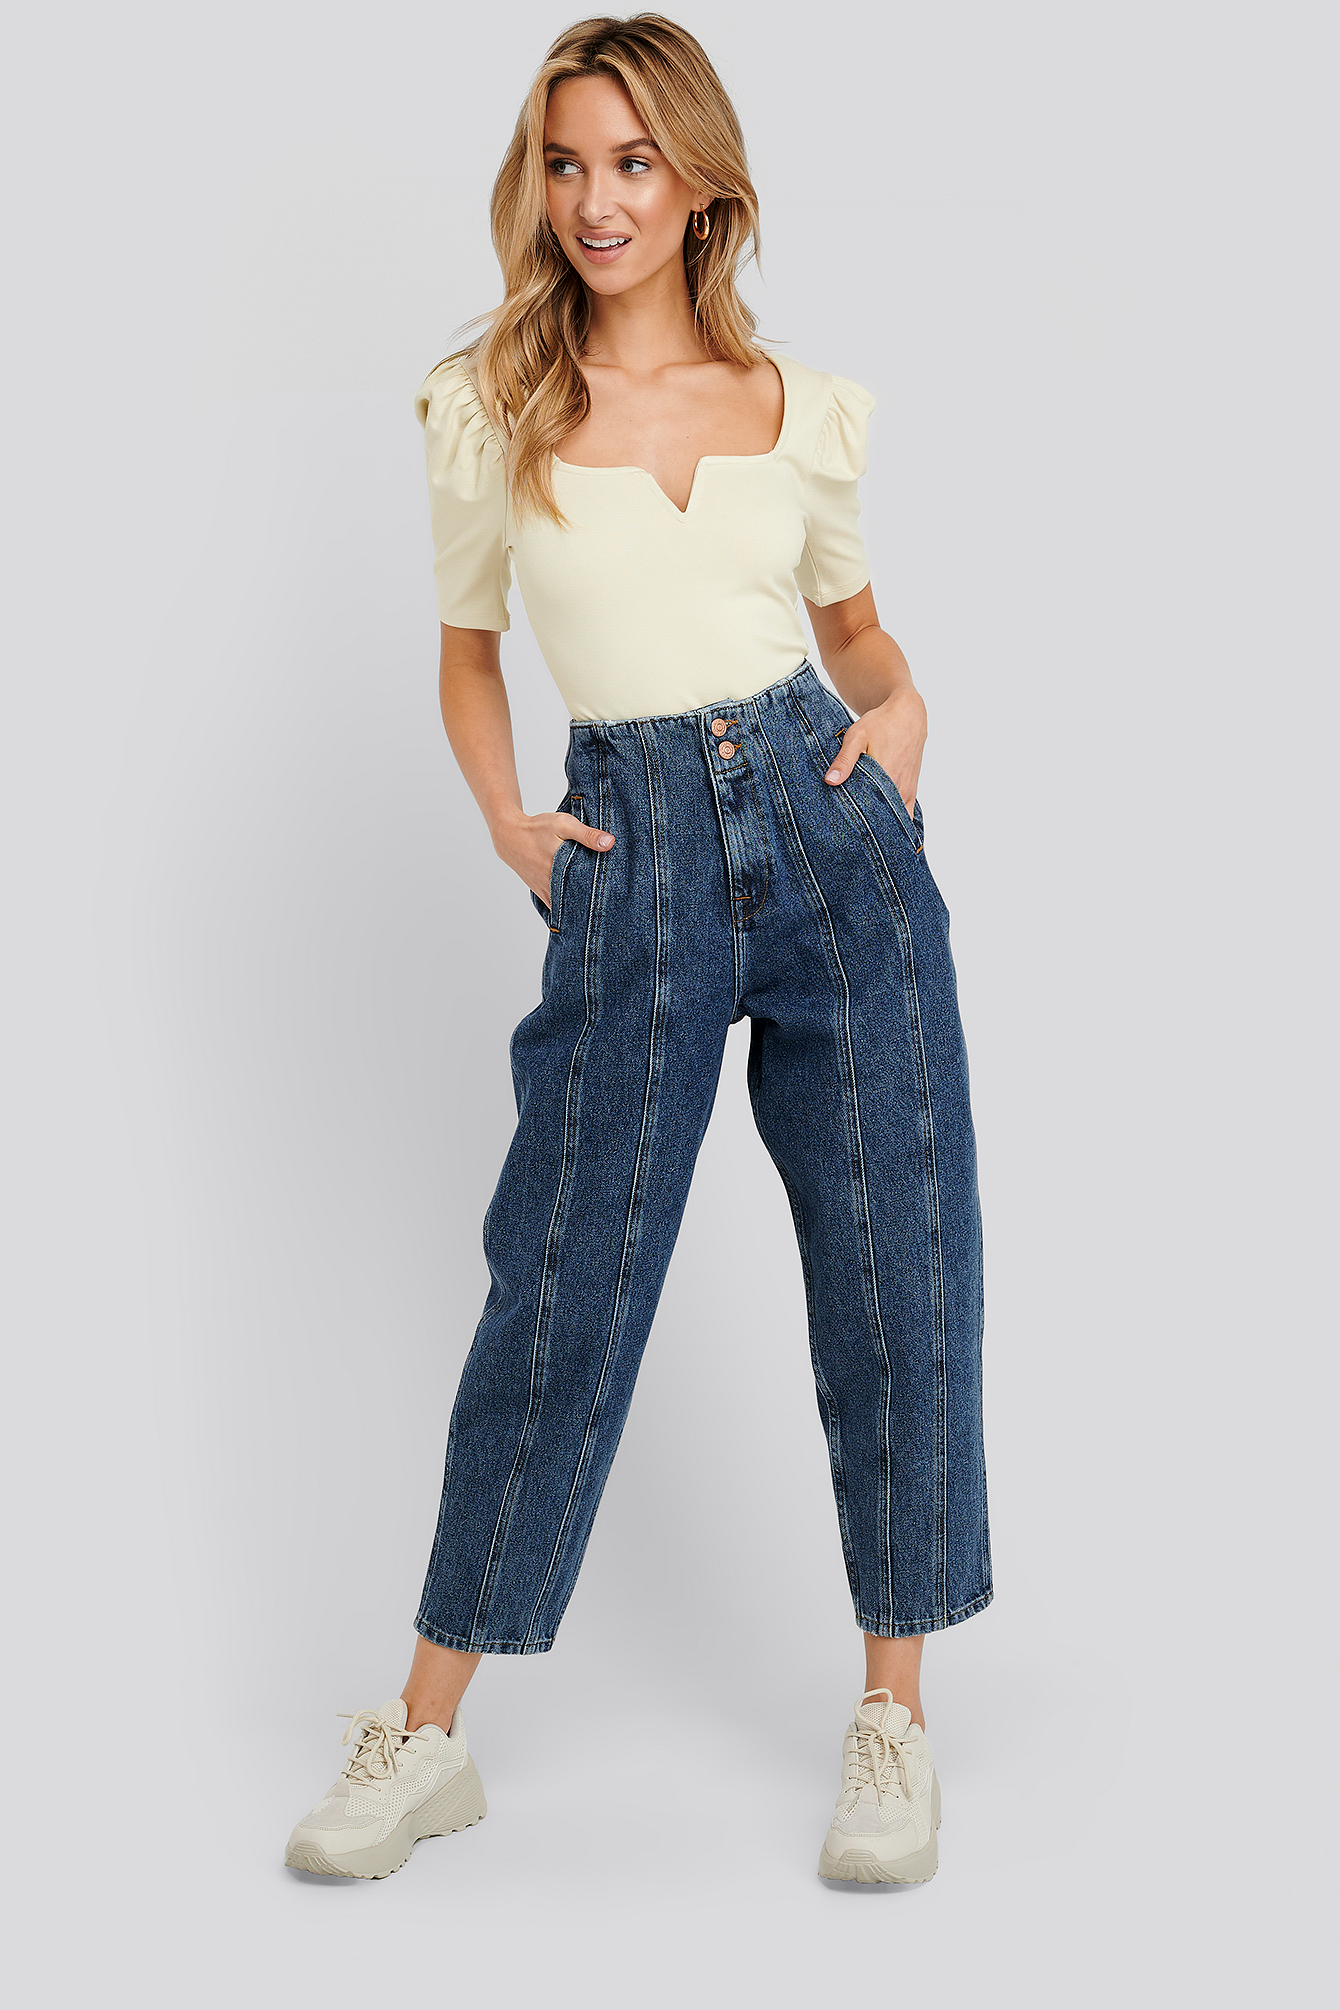 slouchy jeans